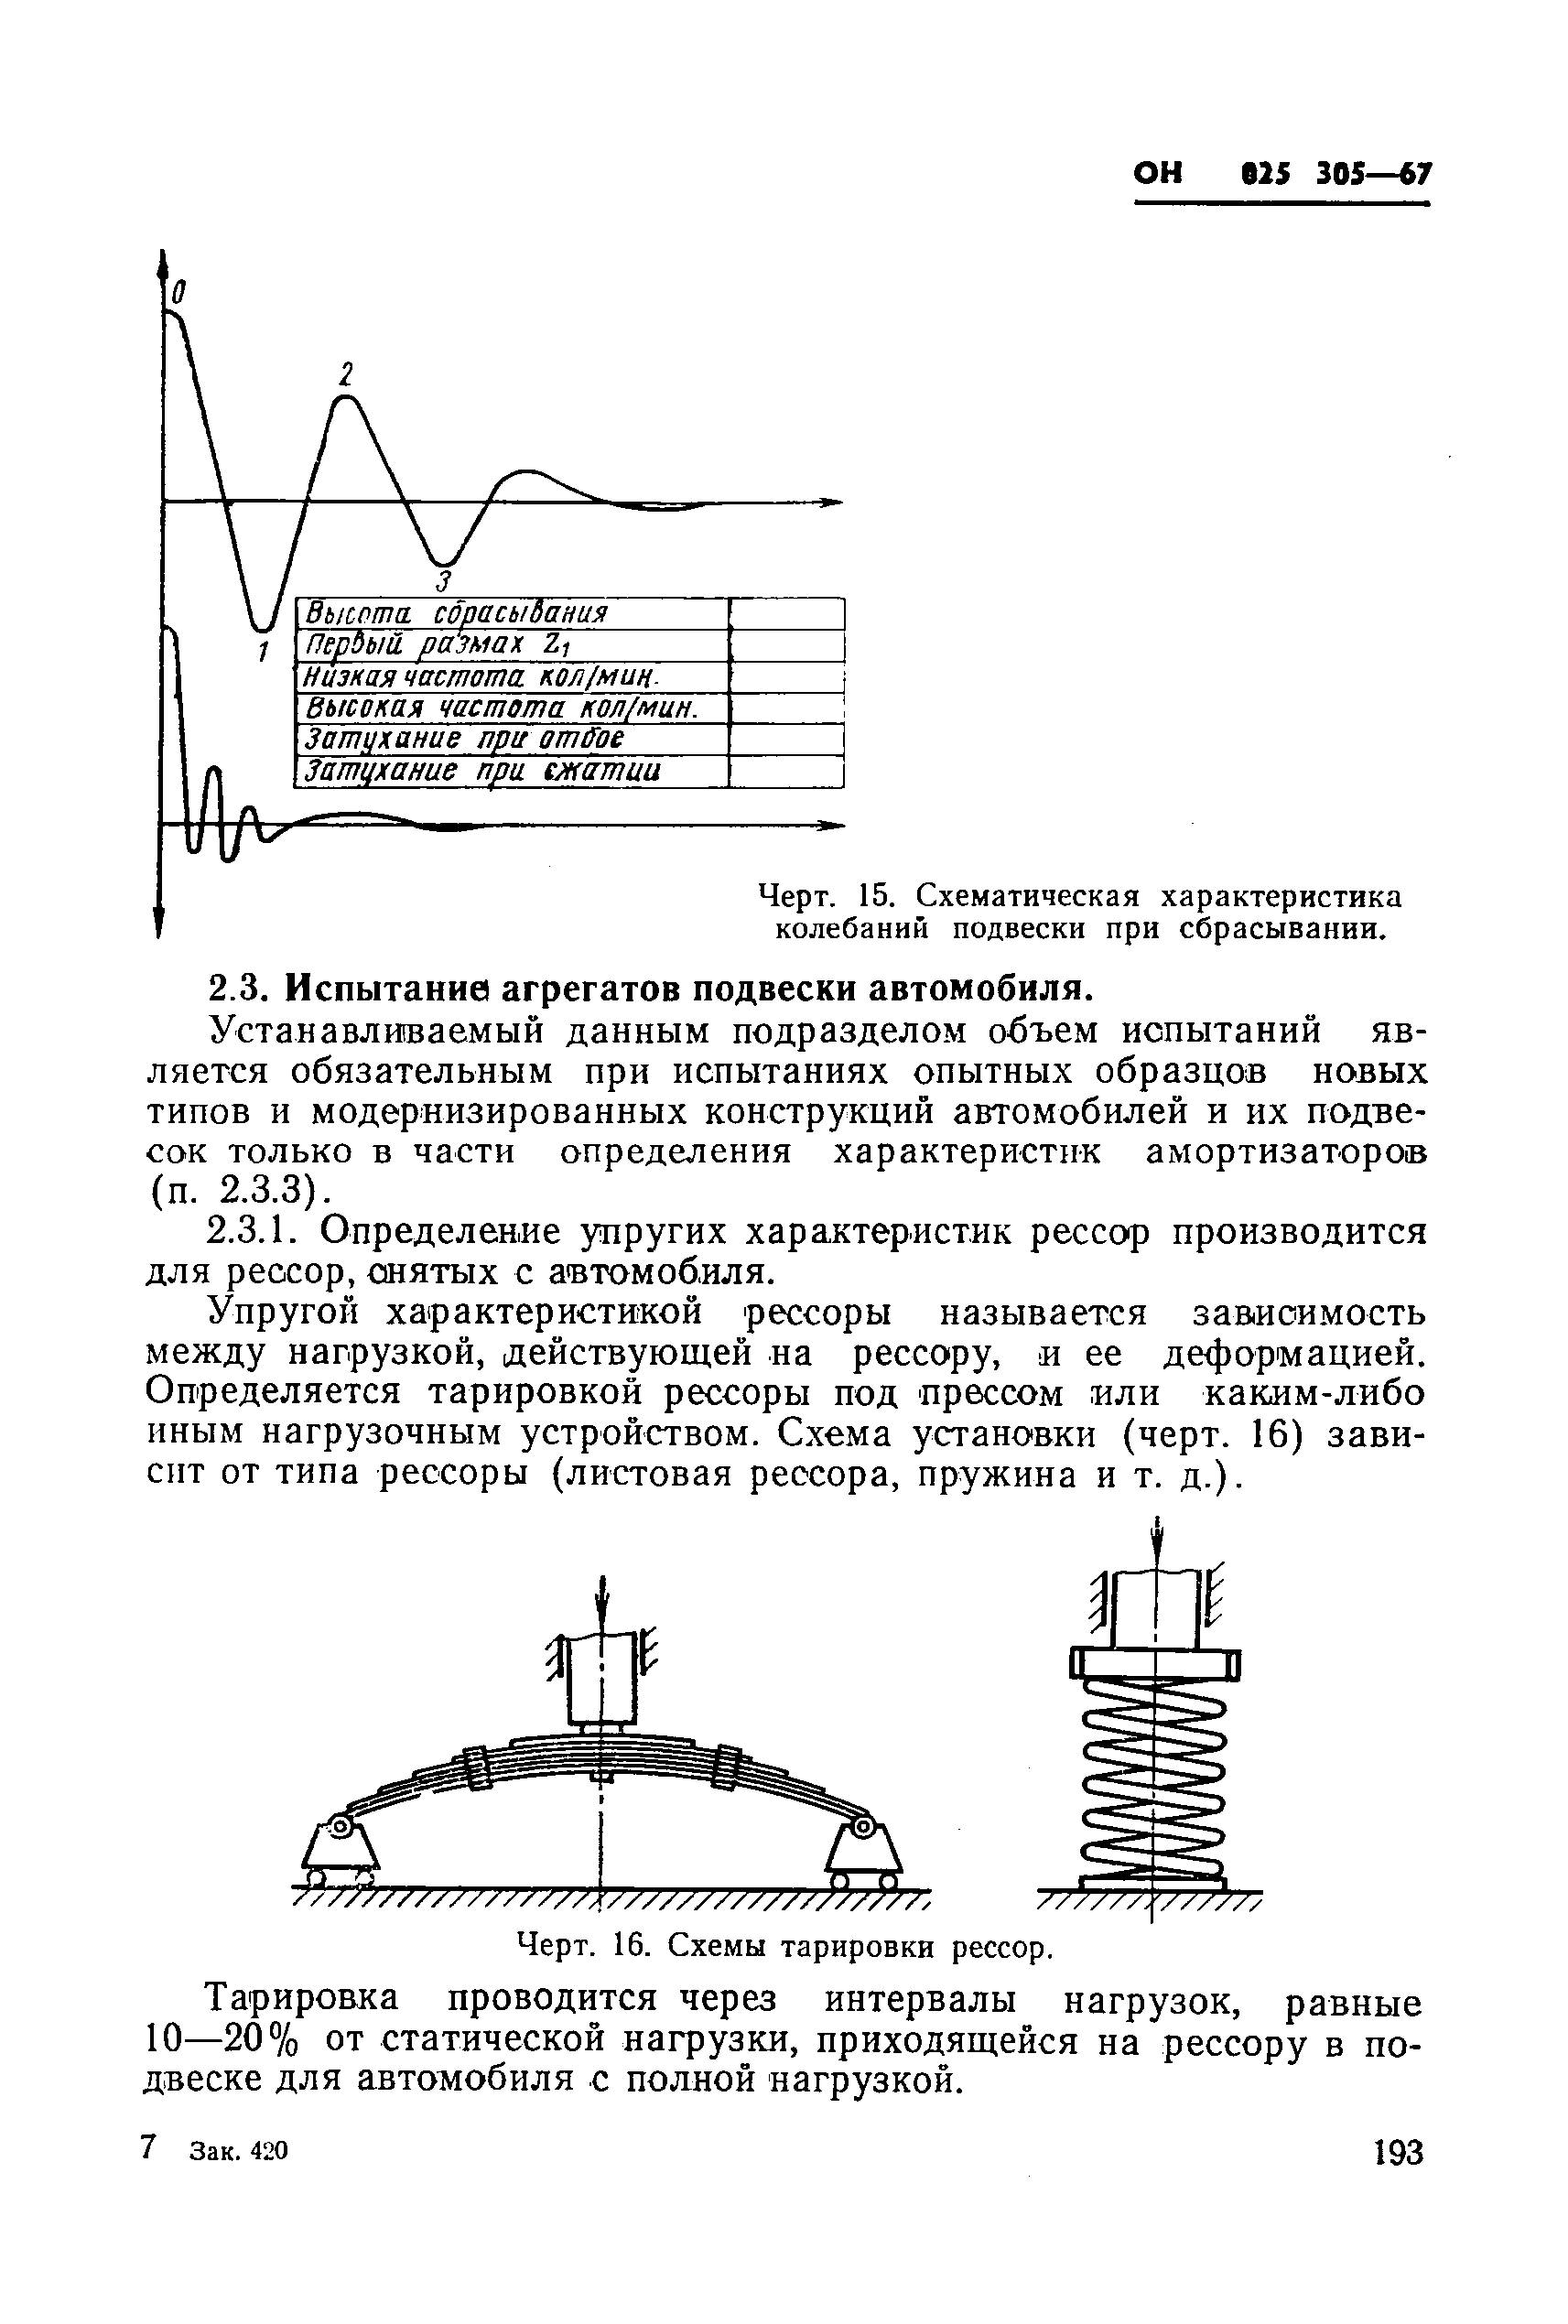 ОН 025 305-67